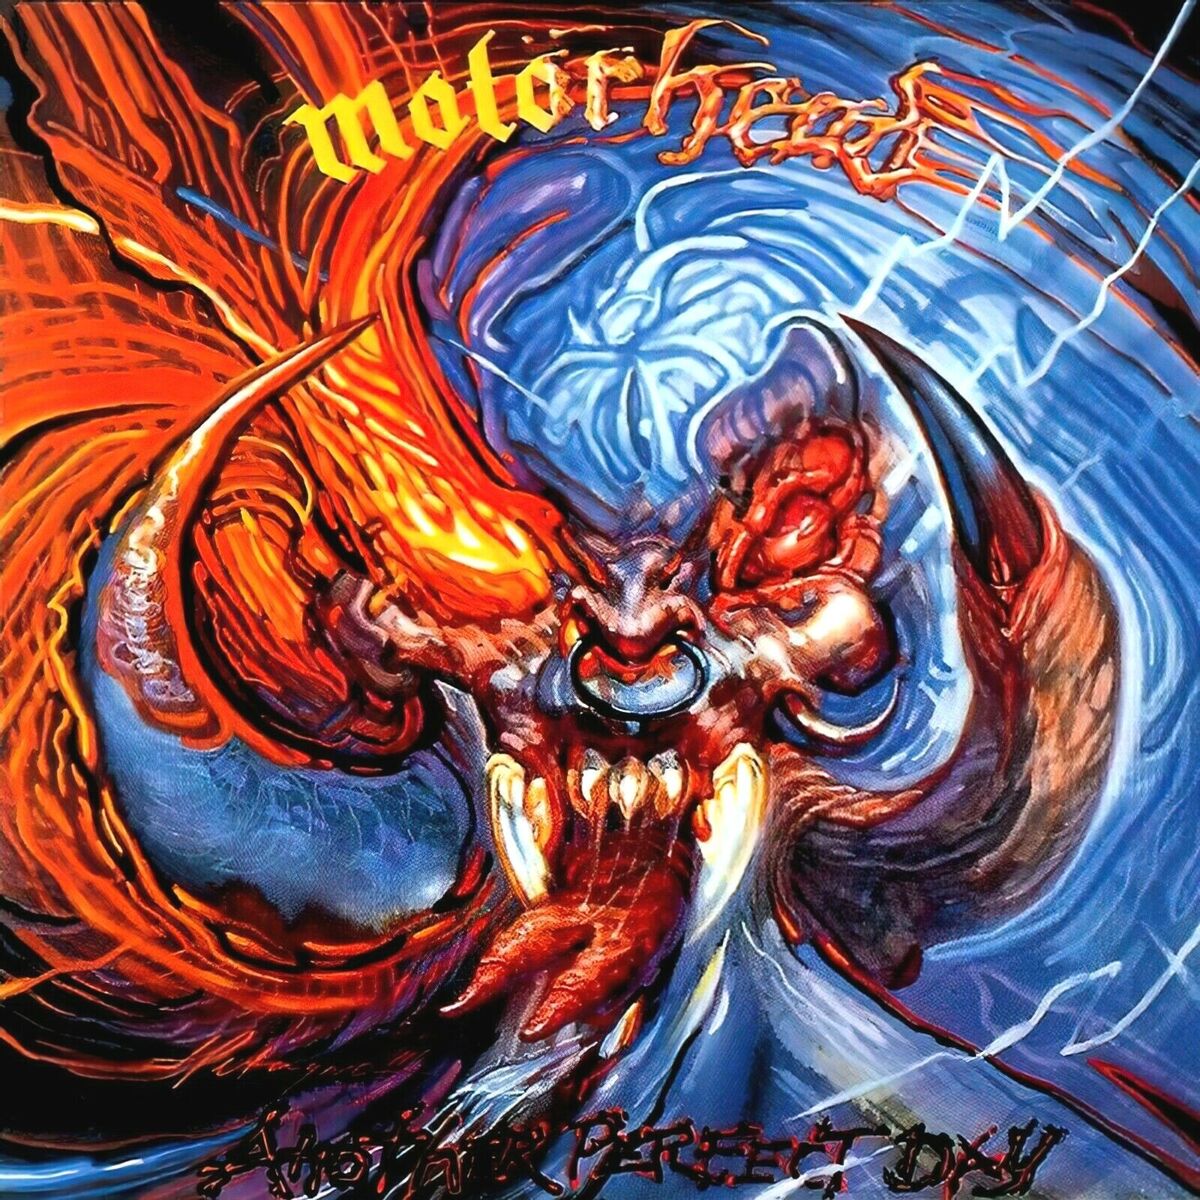 Металл BMG Motorhead - Another Perfect Day (Half Speed) (Coloured Vinyl LP) industrial rocky 6610 100% tested perfect quality